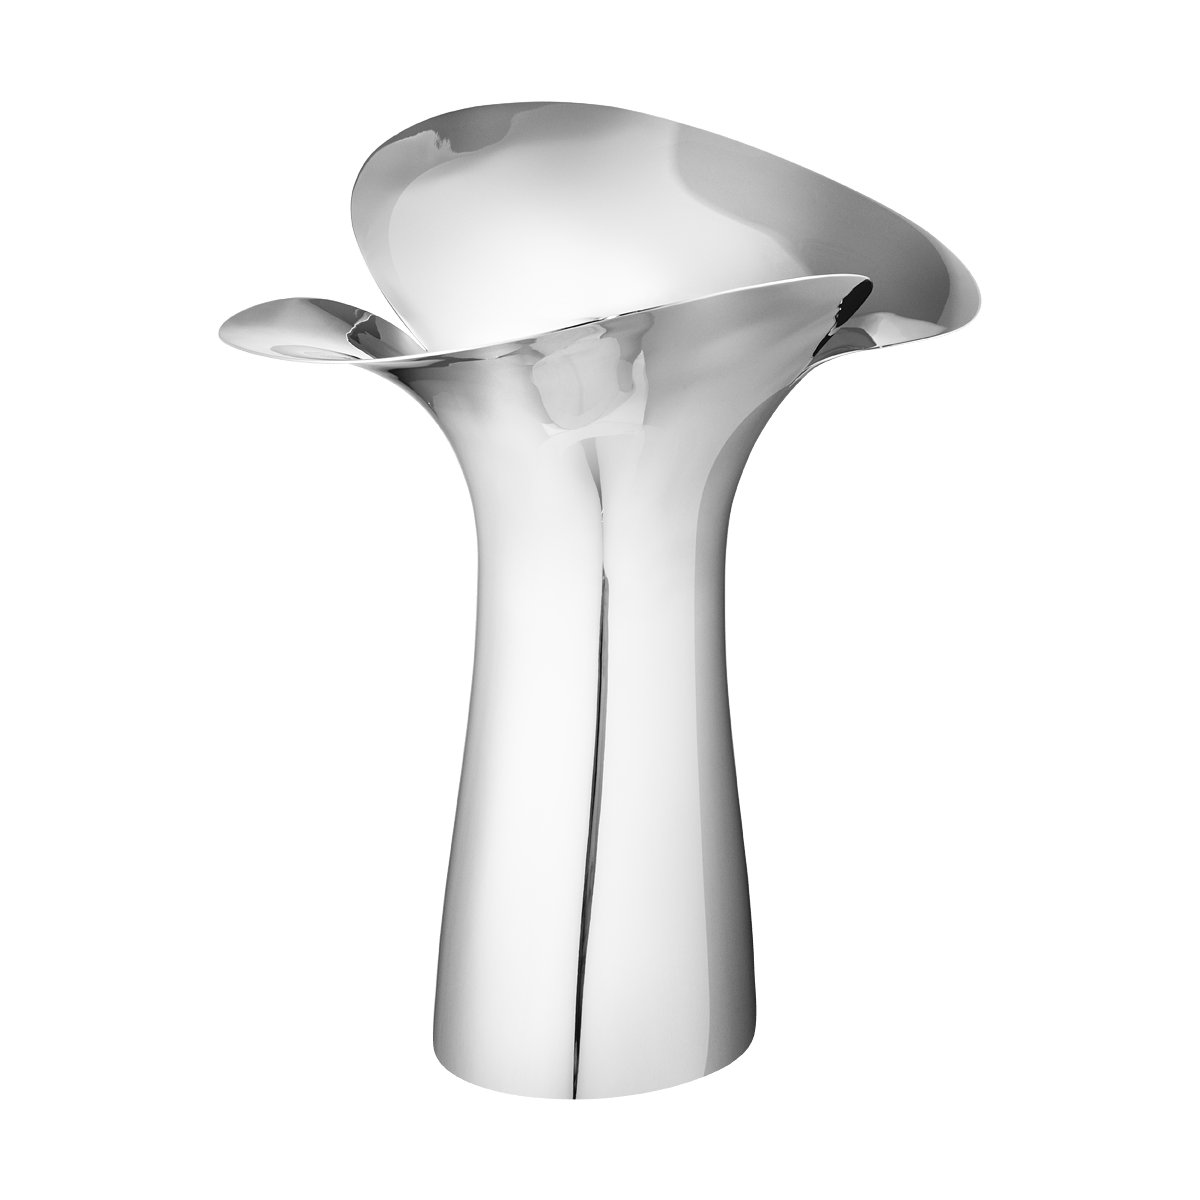 BLOOM stylish large vase in stainless steel